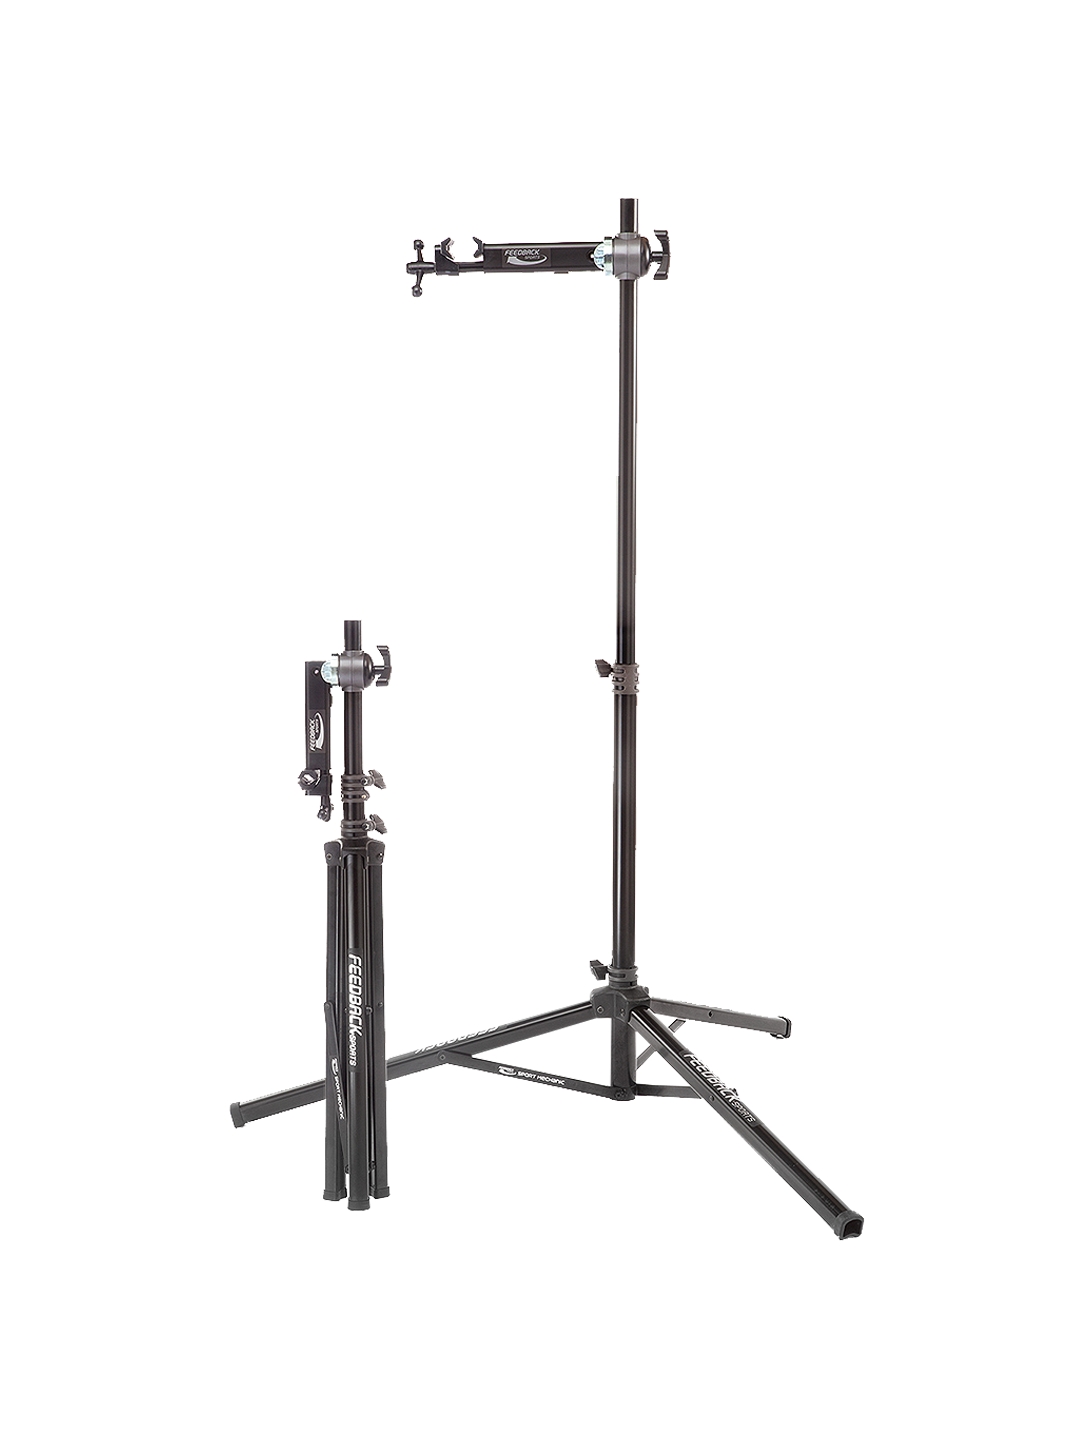 bontrager homewrench repair stand